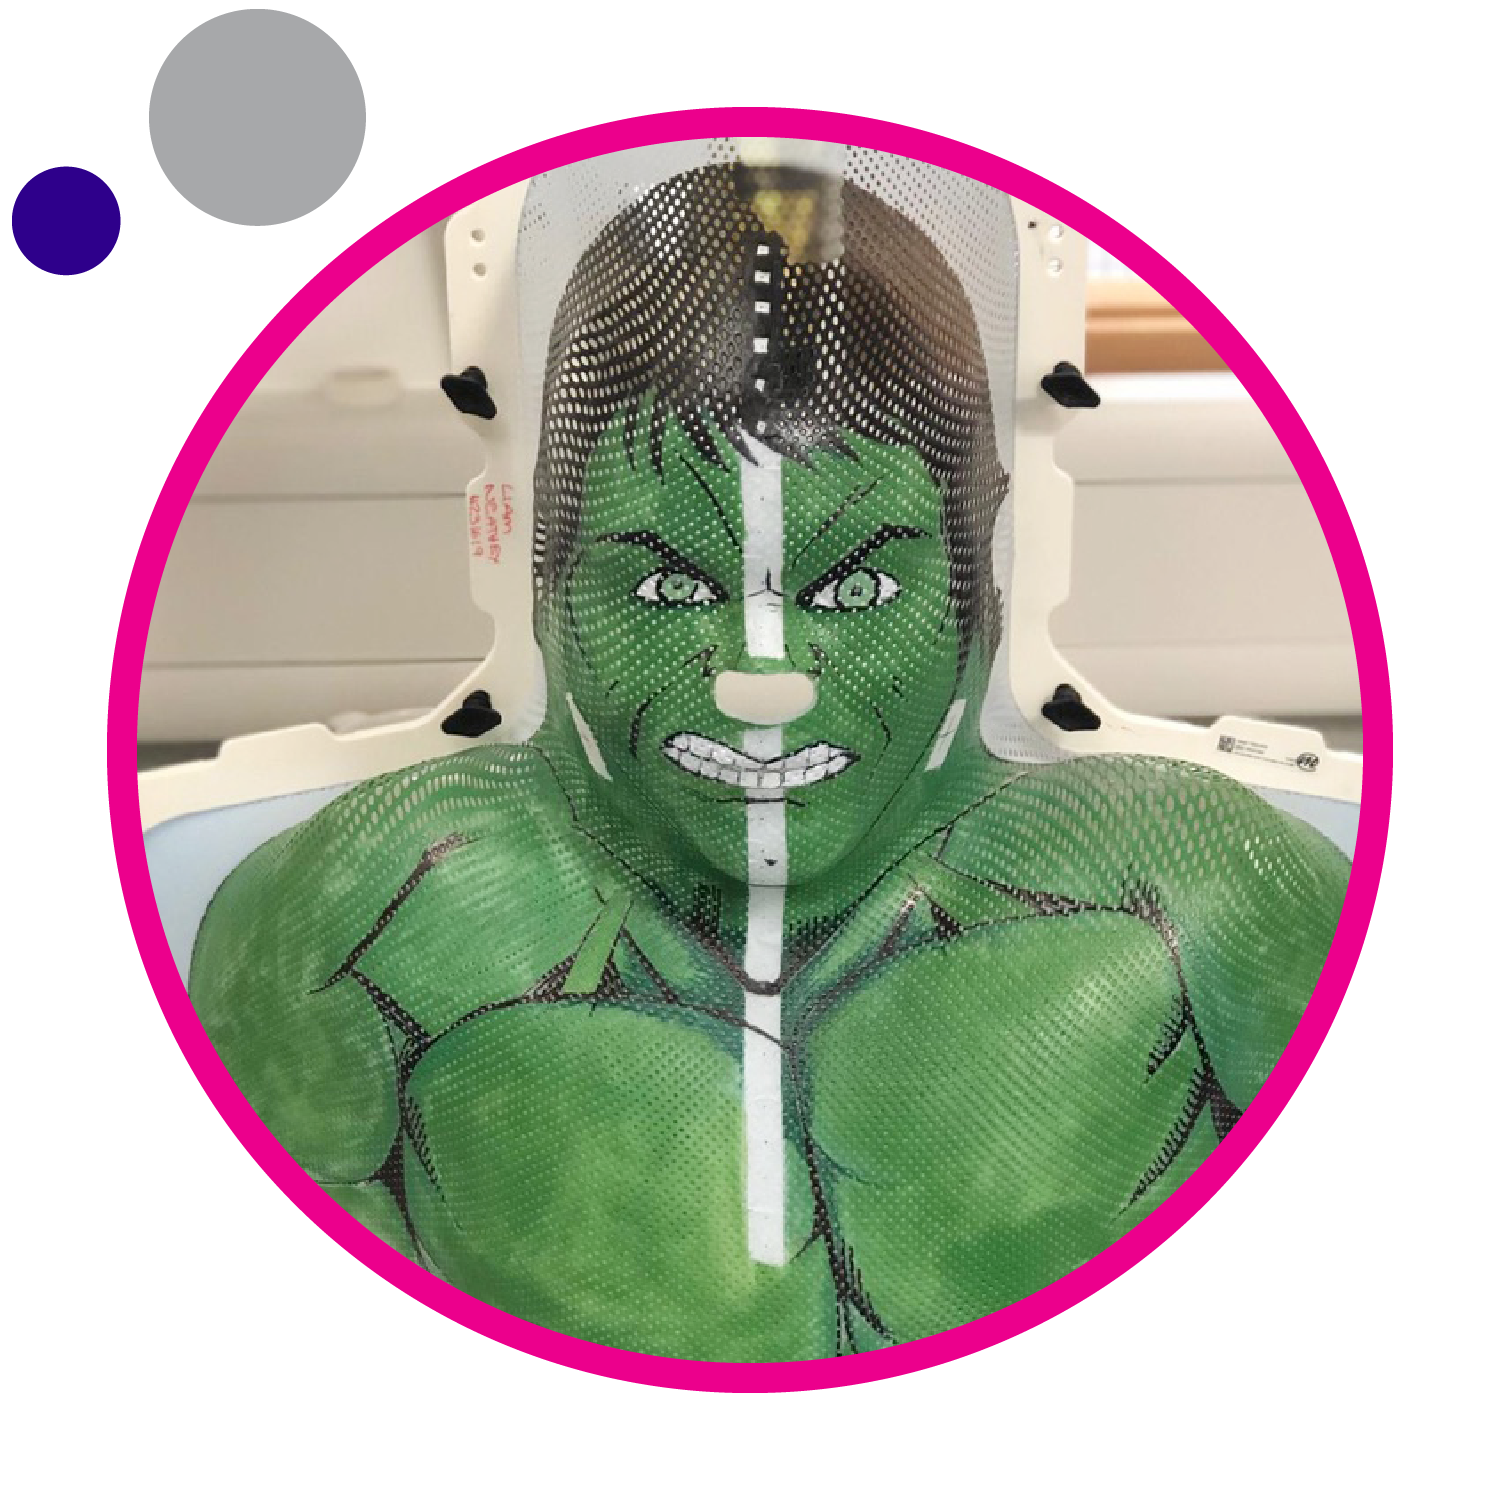 A child's radiotherapy mask decorated to look like the Hulk.